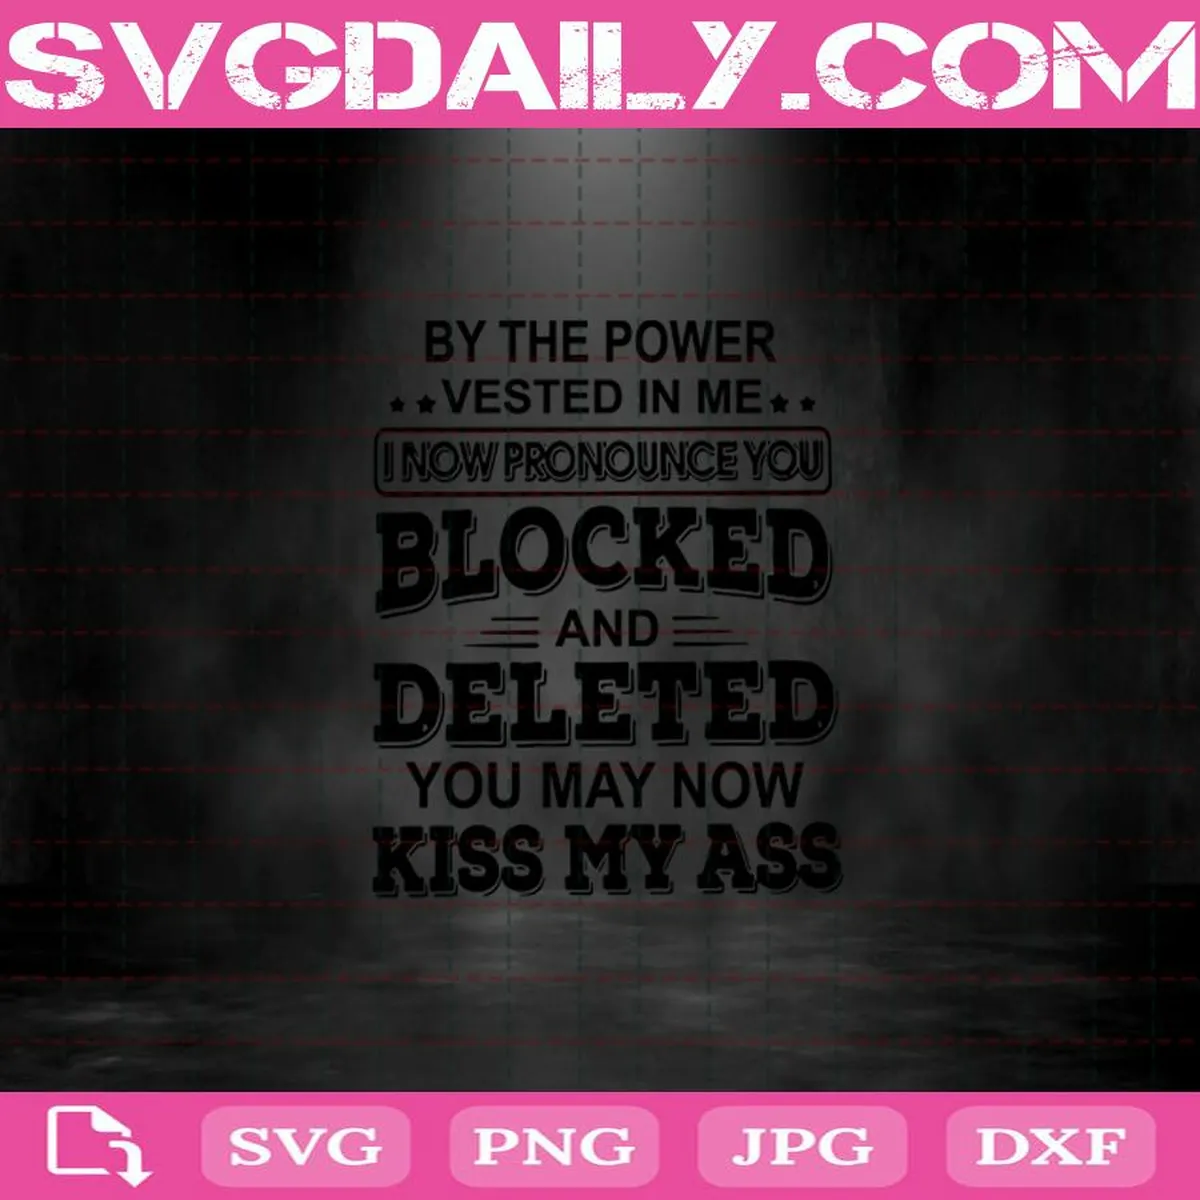 By The Power Vested In Me I Now Pronounce You Blocked And Deleted You May Now Kiss My Ass Svg Png Dxf Eps AI Instant Download